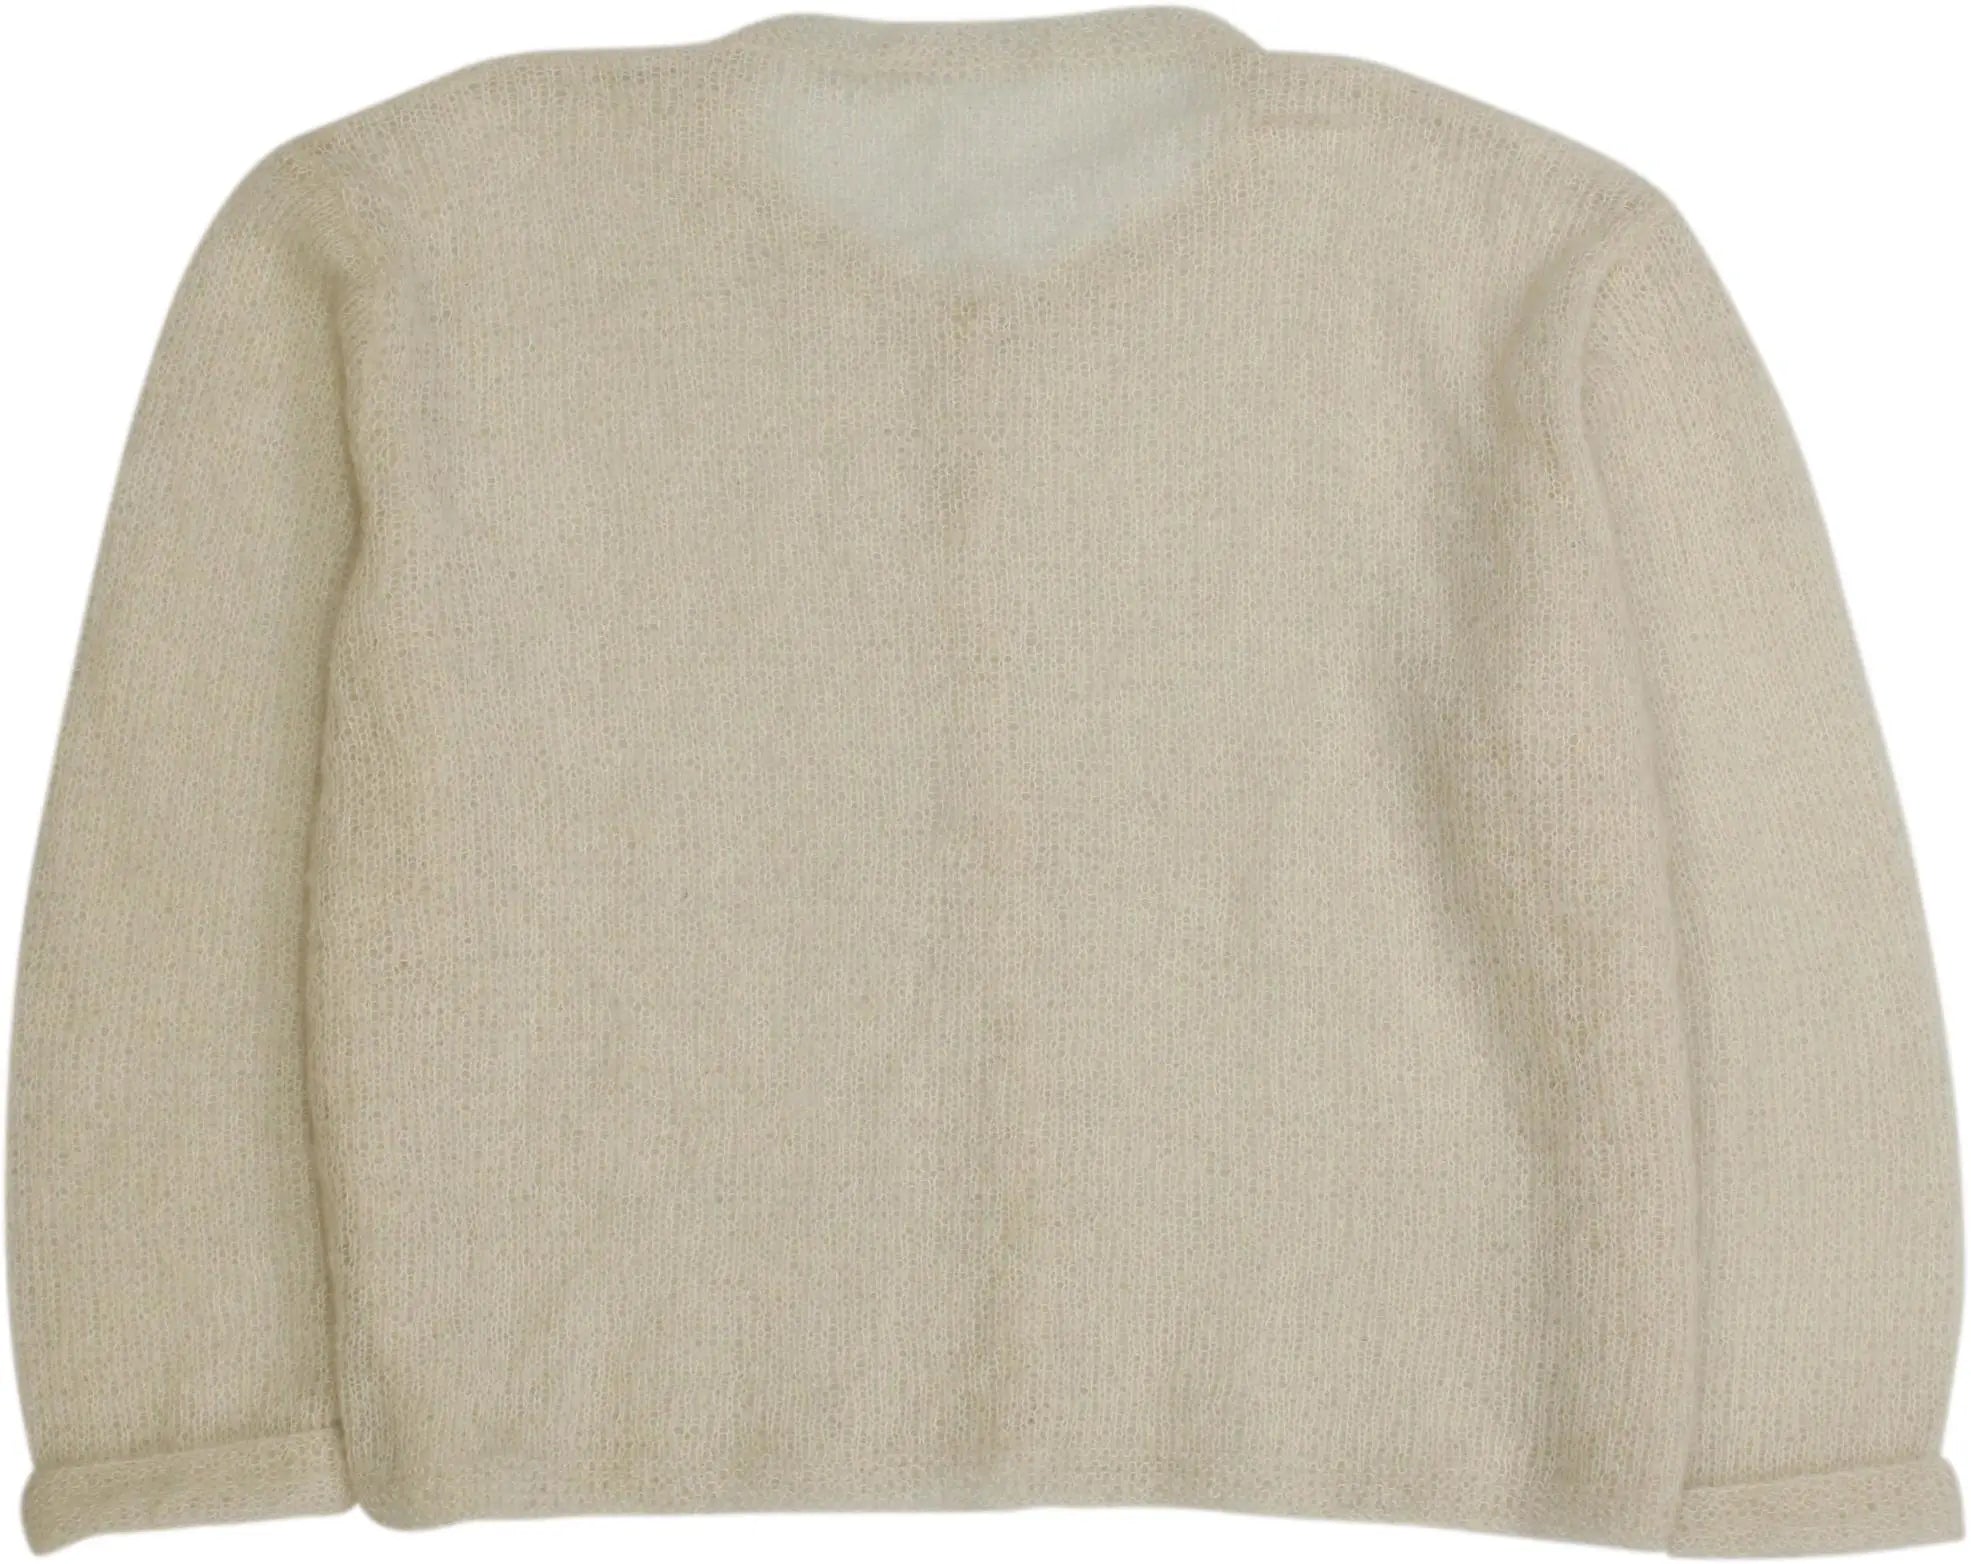 Unknown - Cream Knitted Cardigan- ThriftTale.com - Vintage and second handclothing